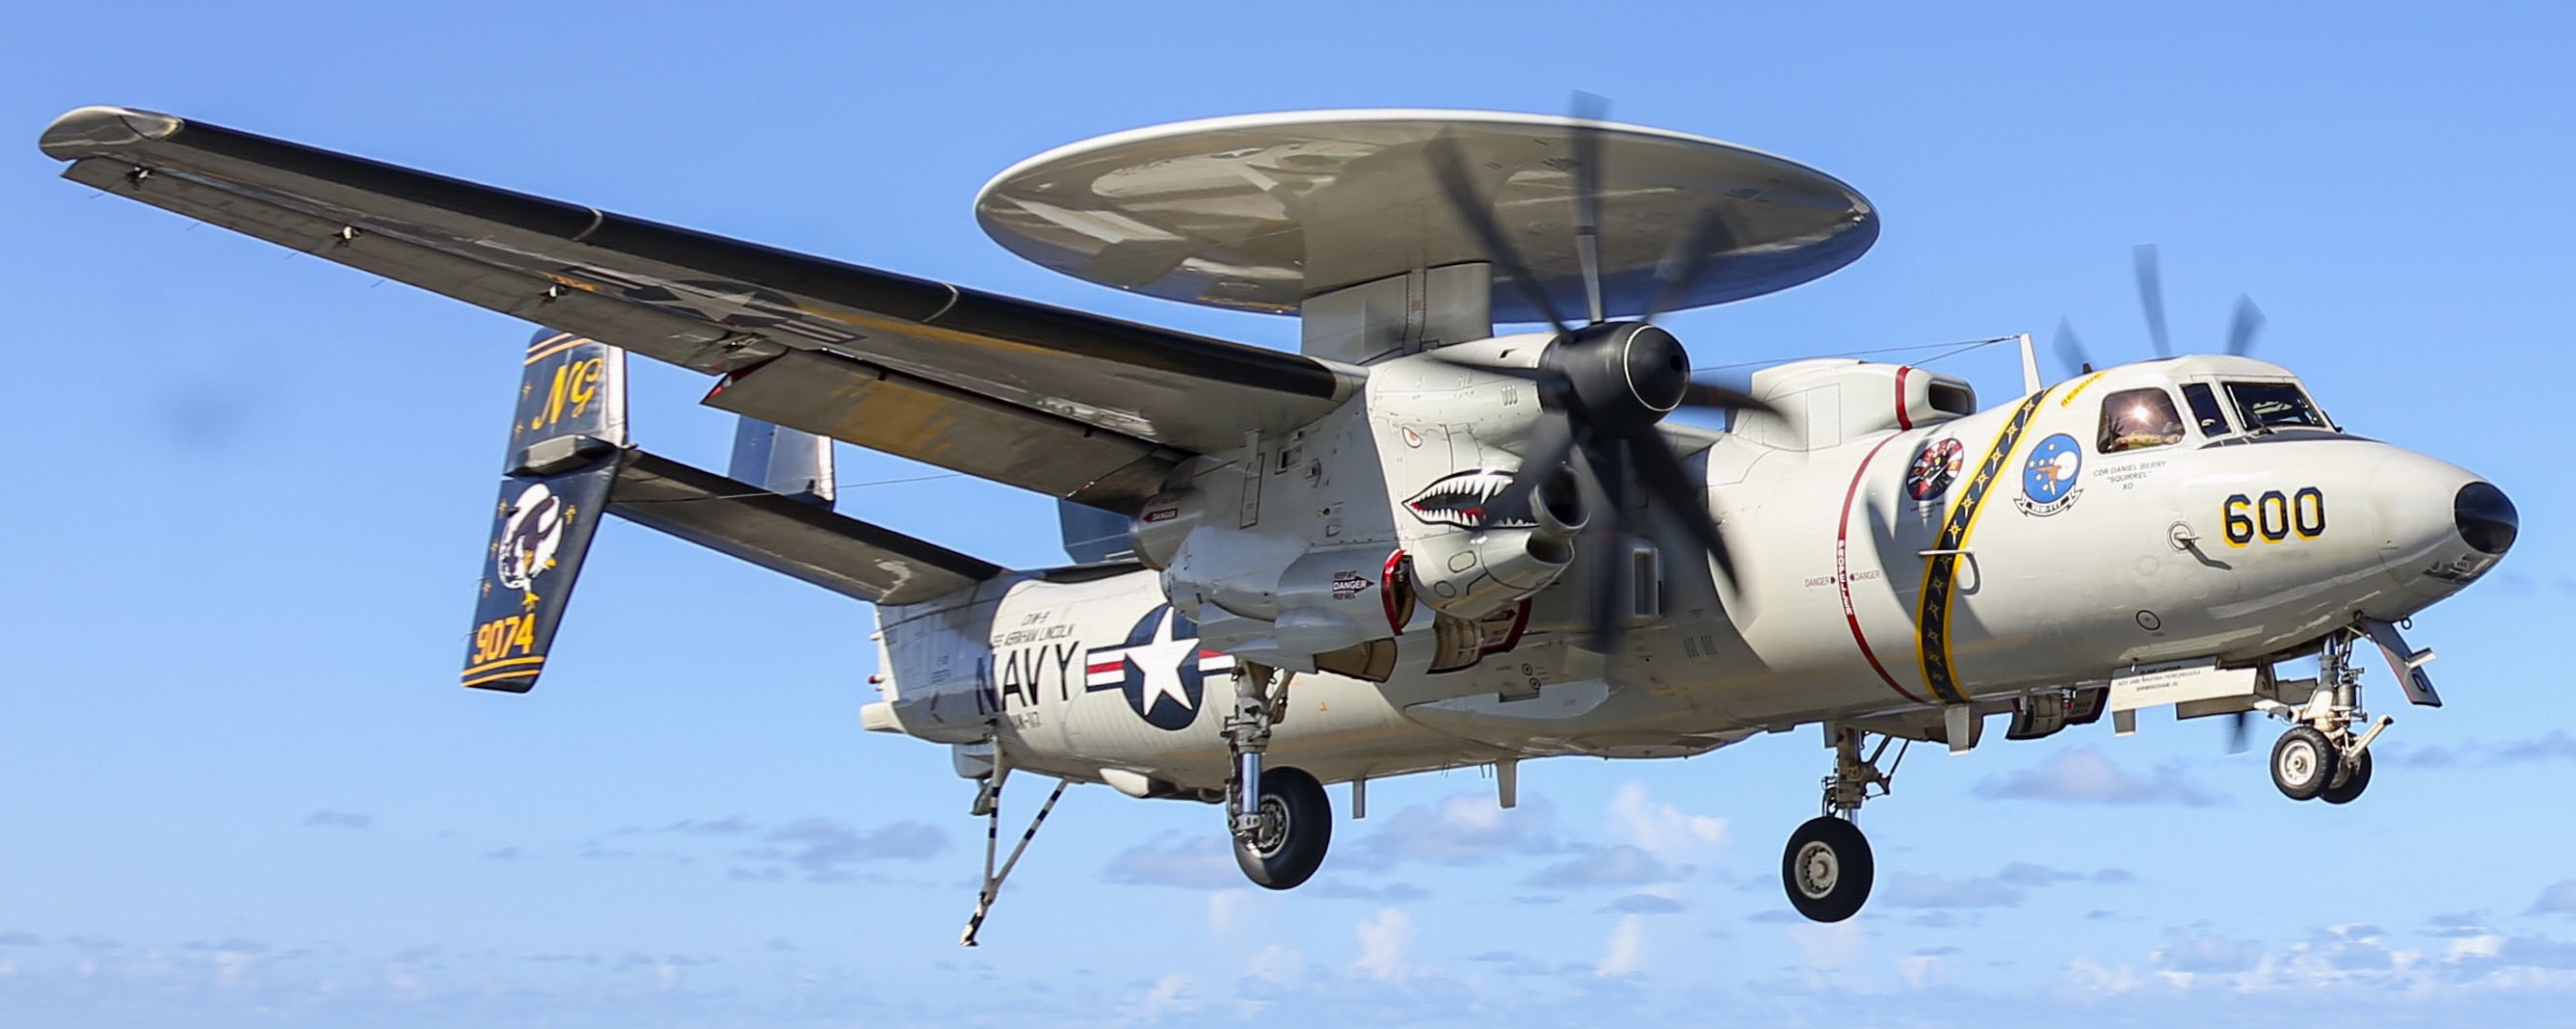 vaw-117 wallbangers airborne command and control squadron navy e-2d hawkeye cvw-9 uss abraham lincoln cvn-72 06